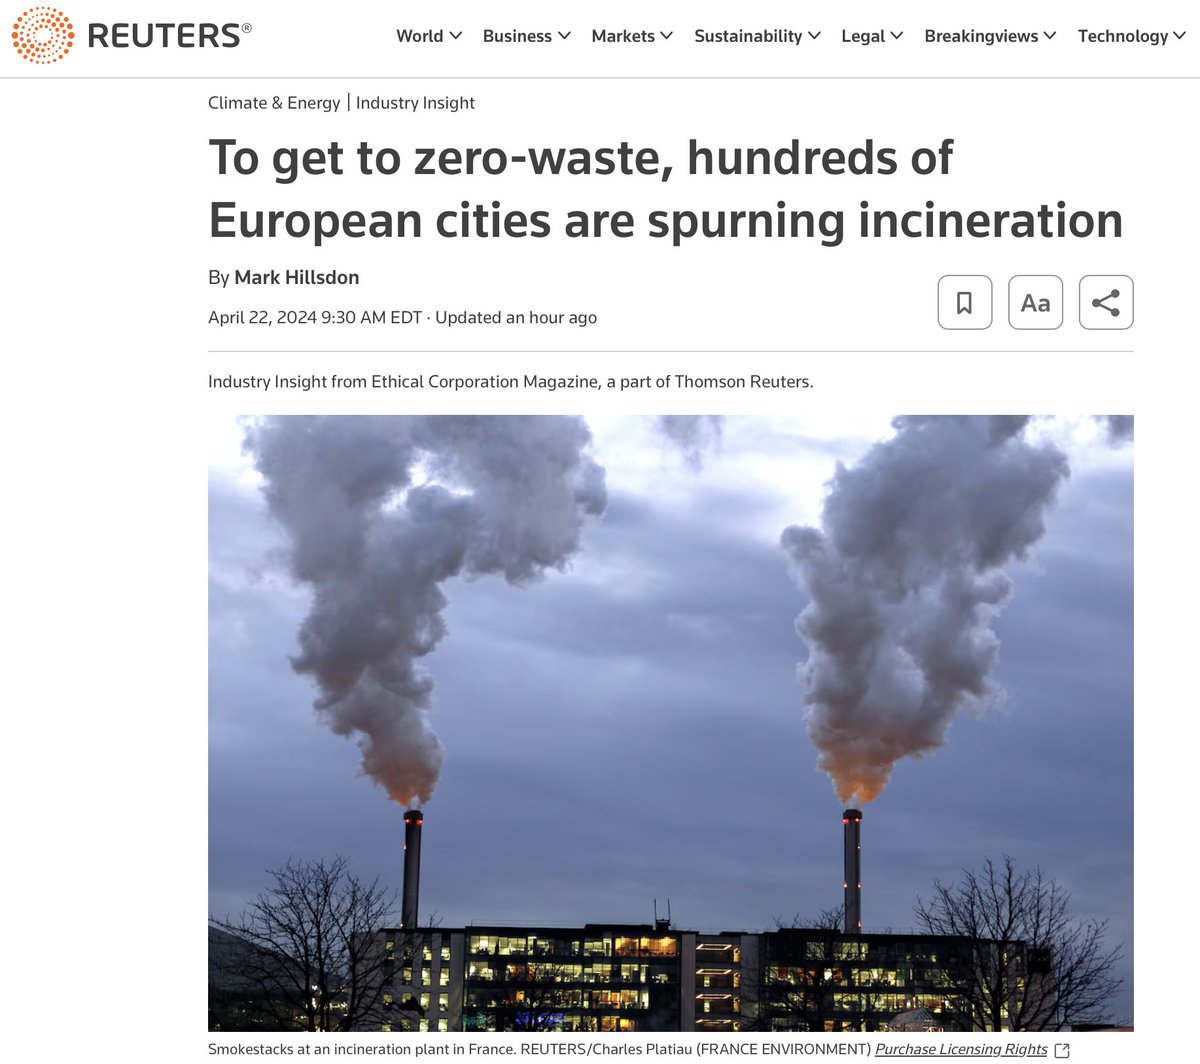 Incineration is the cleanest and most economical way to dispose of trash. Naturally, greens oppose it. reuters.com/sustainability…